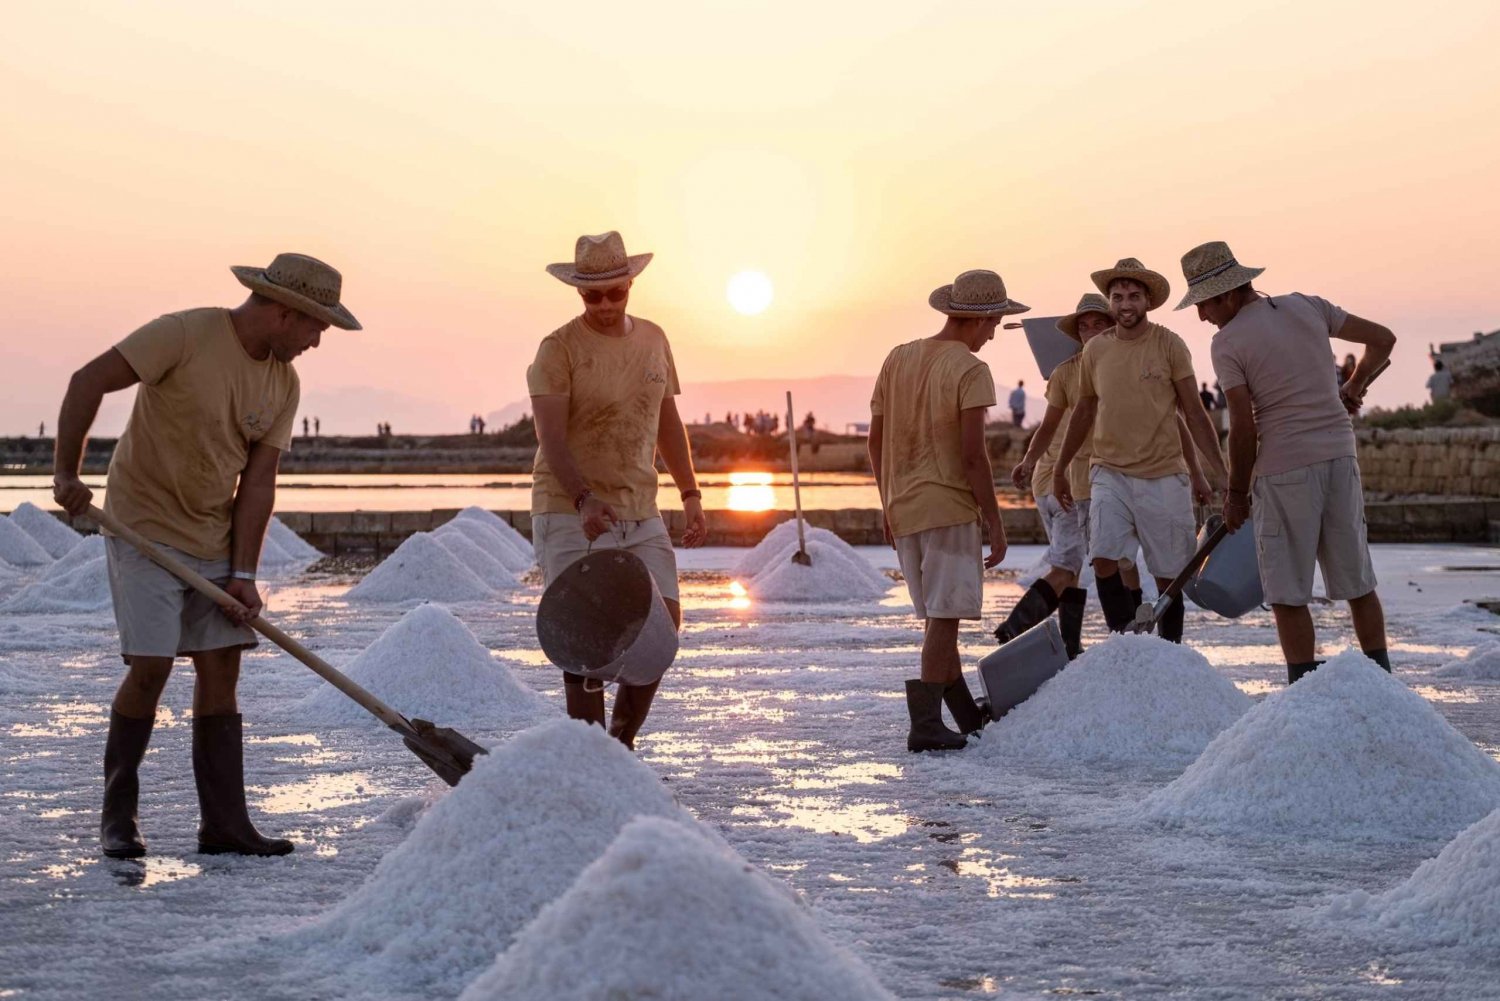 Trapani: Guided Tour of the Salt Pans and Salt Museum